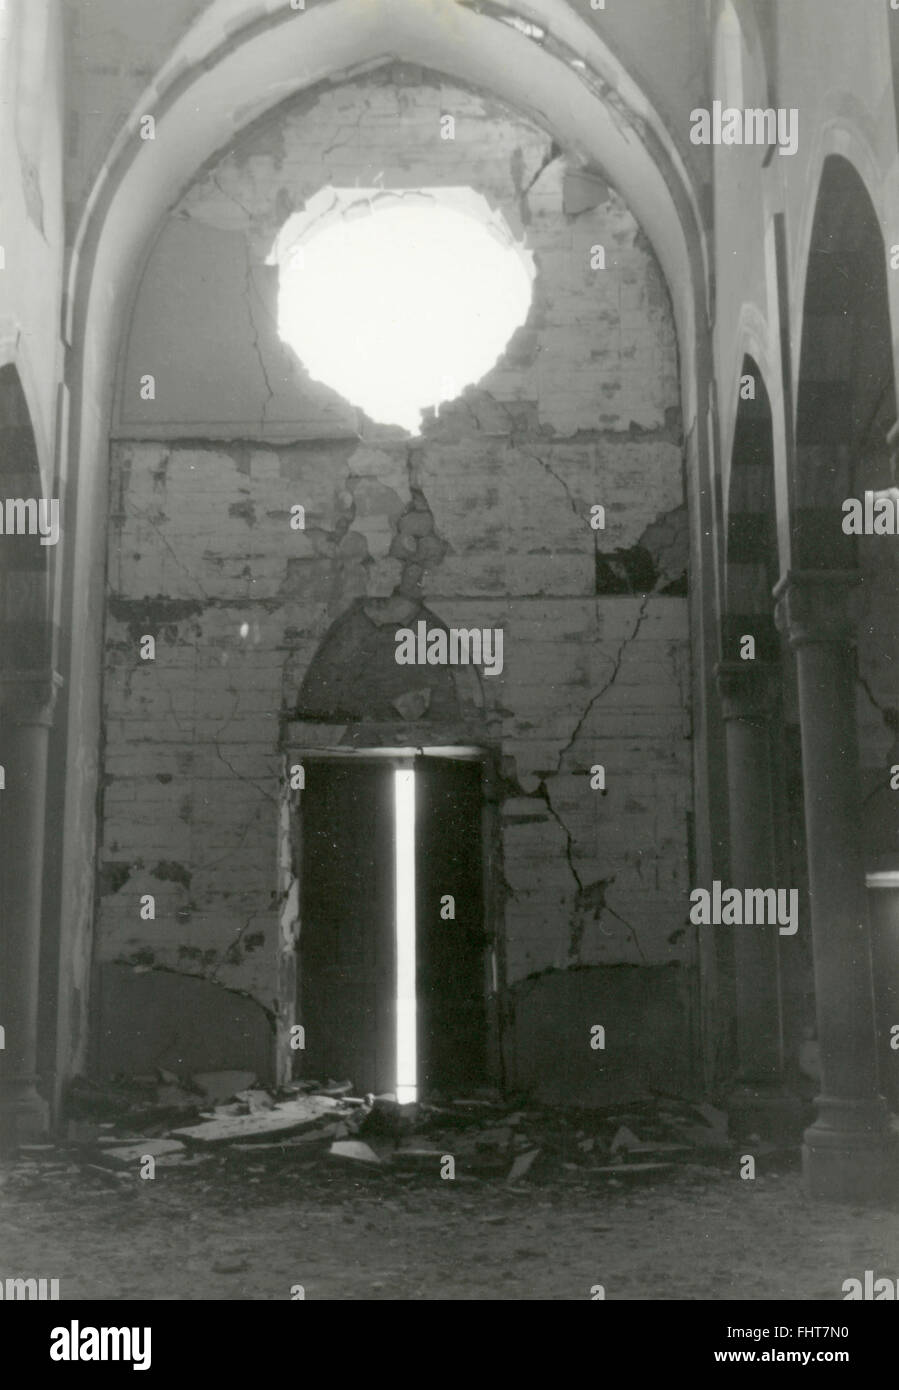 Earthquake in Friuli, Italy 1976: The damage to the church Stock Photo